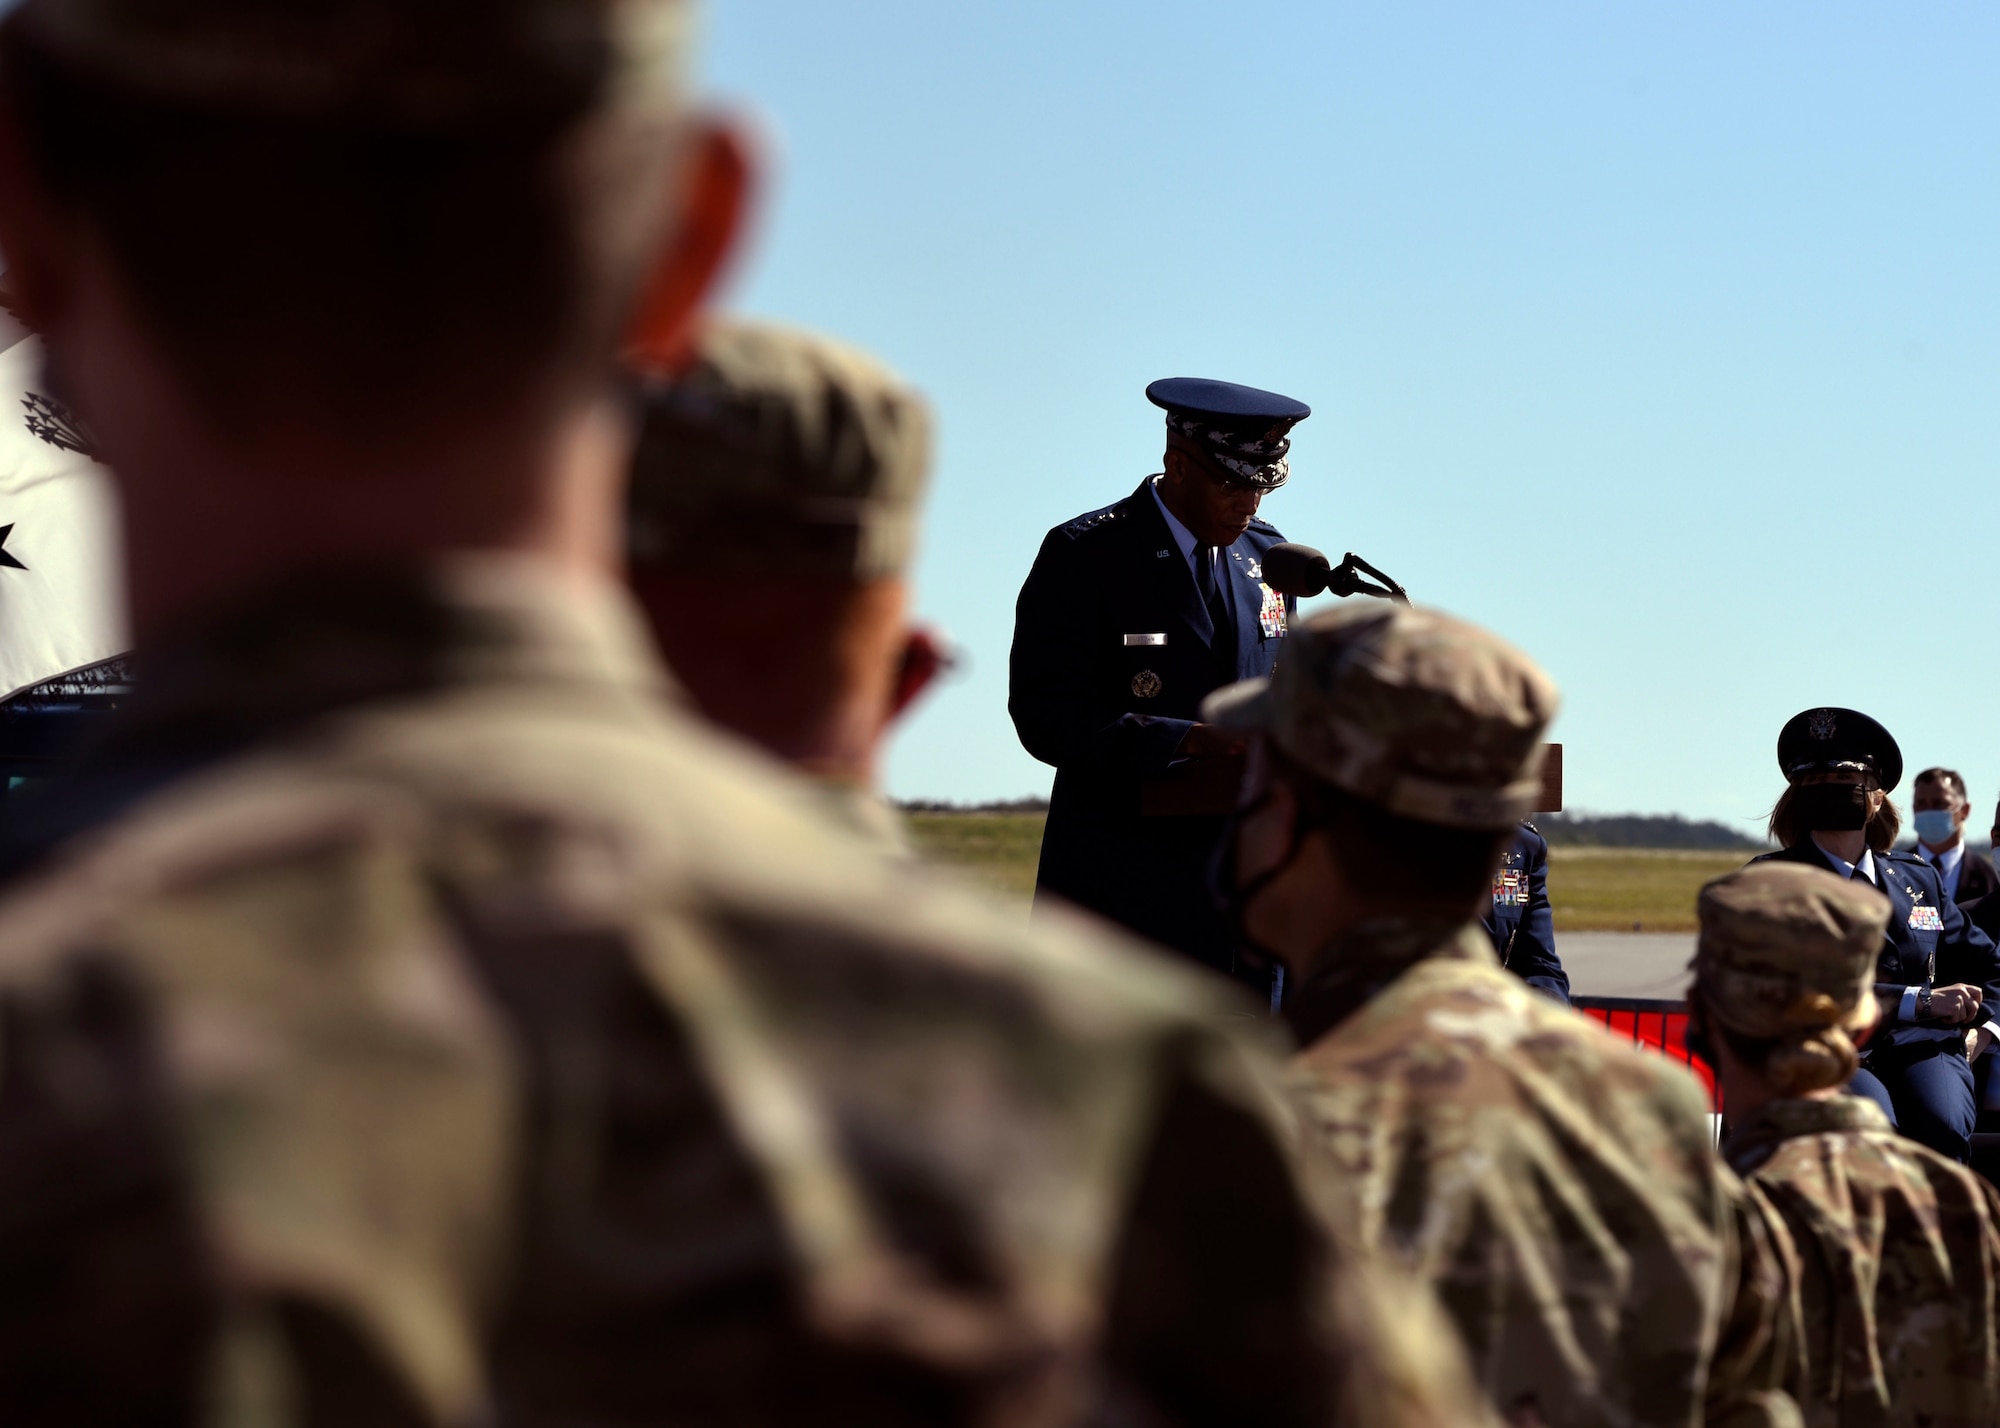 Air Force Chief of Staff Gen. Charles Q. Brown, Jr. addresses Airmen at the renaming ceremony of two Department of the Air Force installations on Dec. 9, 2020, at Cape Canaveral Space Force Station, Fla. Patrick Space Force Base and Cape Canaveral Space Force Station, formerly under the U.S. Air Force, were re-designated as U.S. Space Force bases. (U.S. Space Force photo by Senior Airman Zoe Thacker)